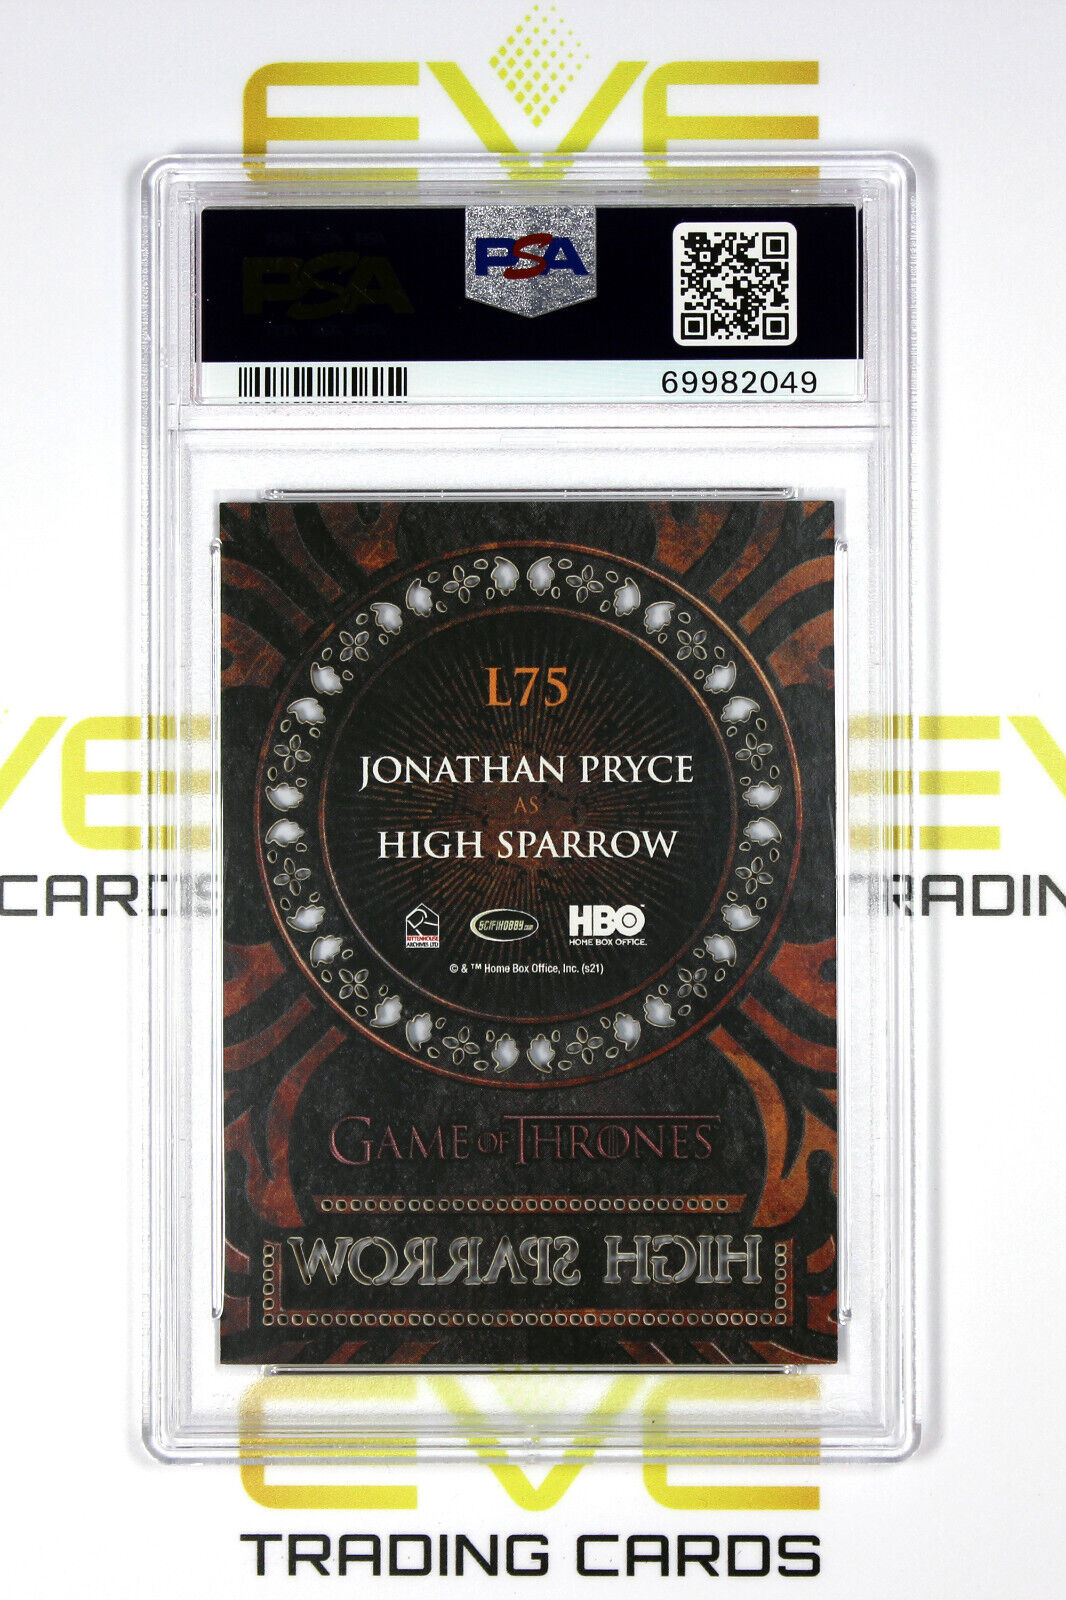 Graded Game of Thrones Card - #L75 2021 High Sparrow - Laser - PSA 9